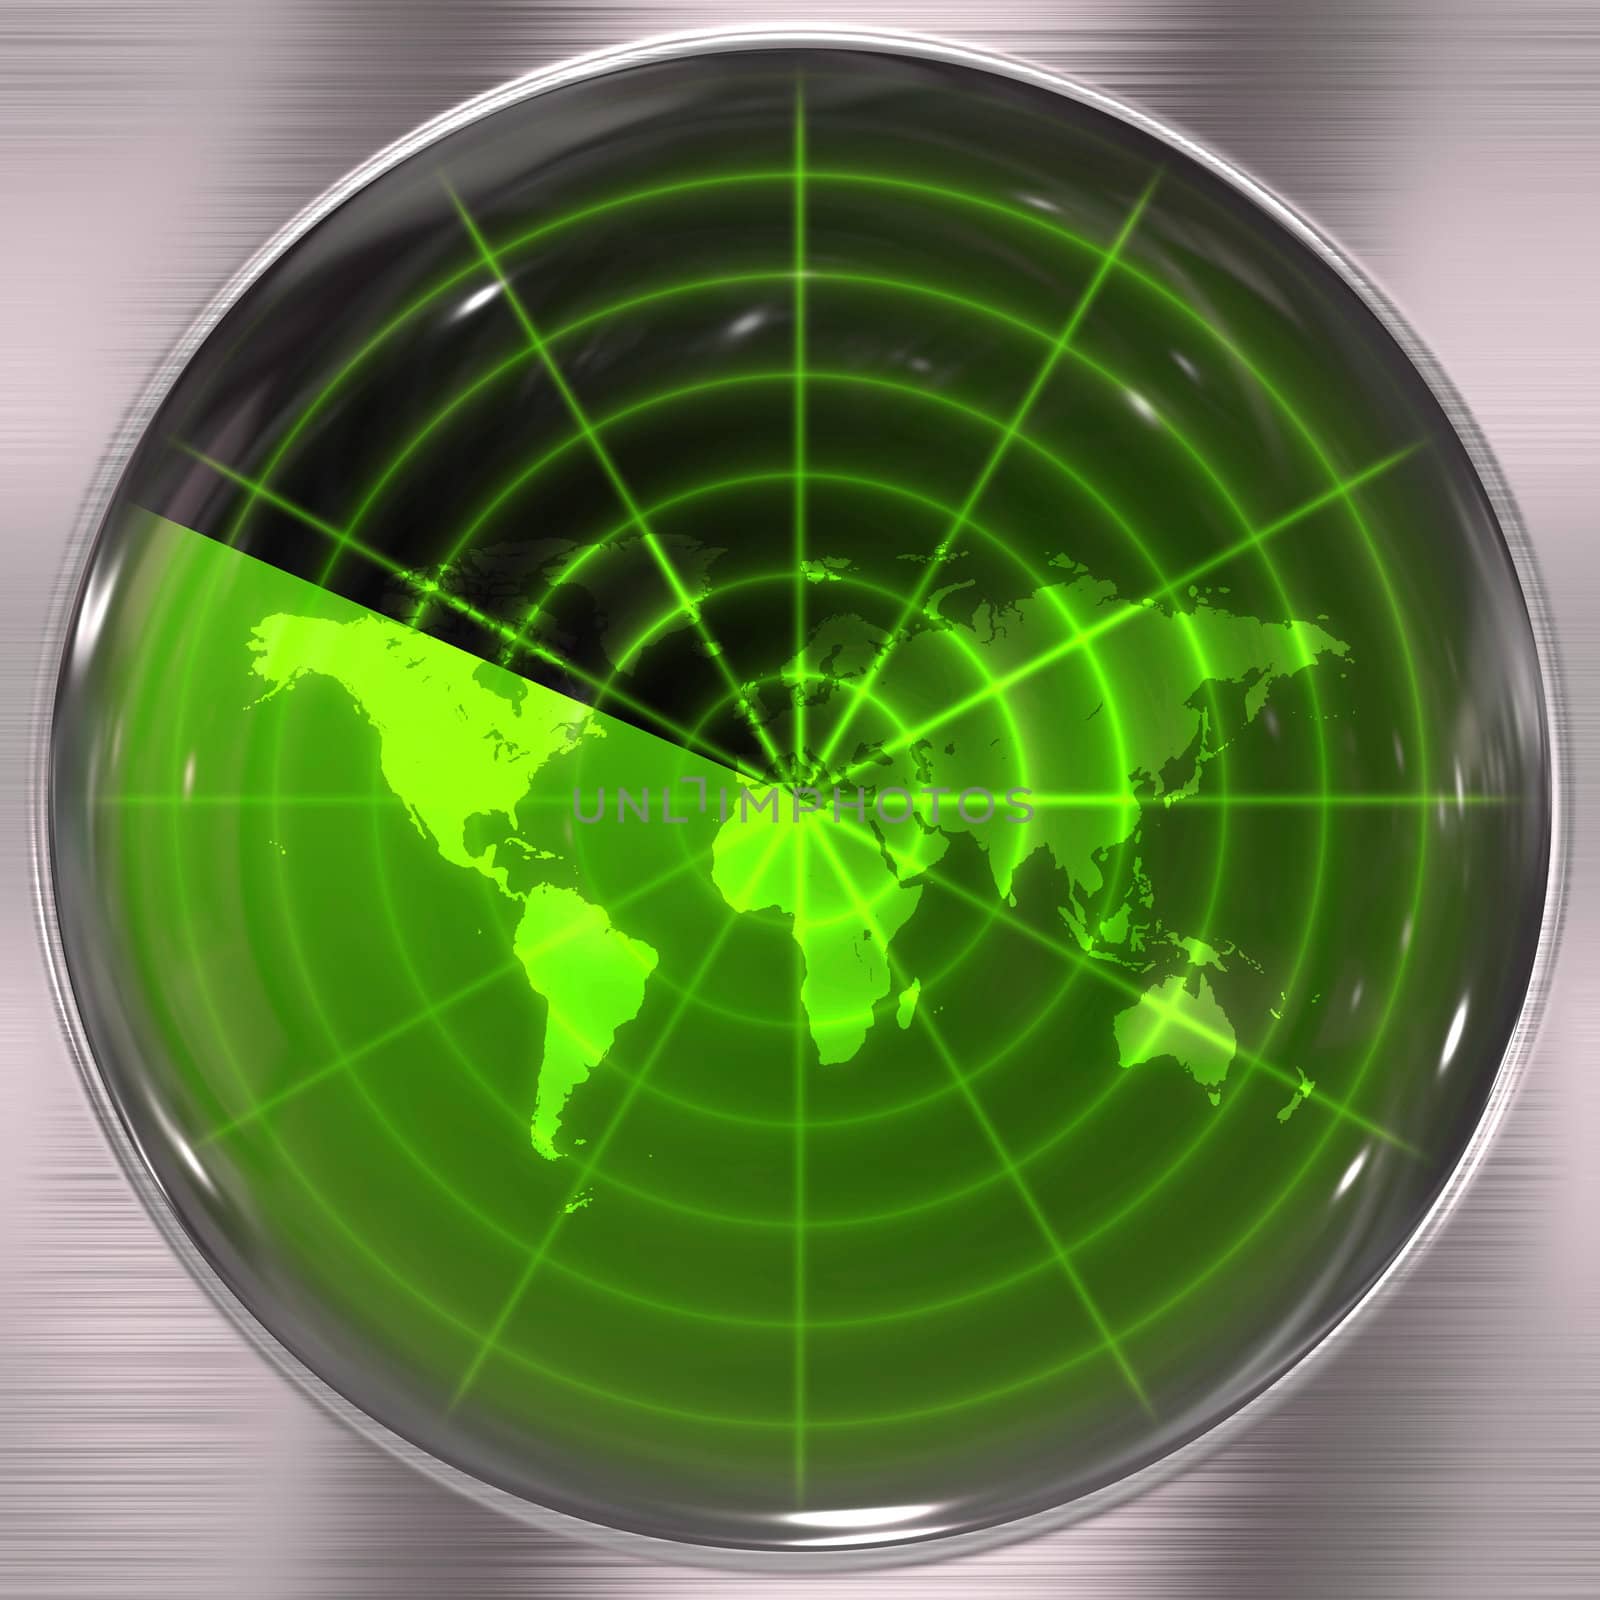 The world map in a radar screen - blips can be added easily anywhere they are needed.